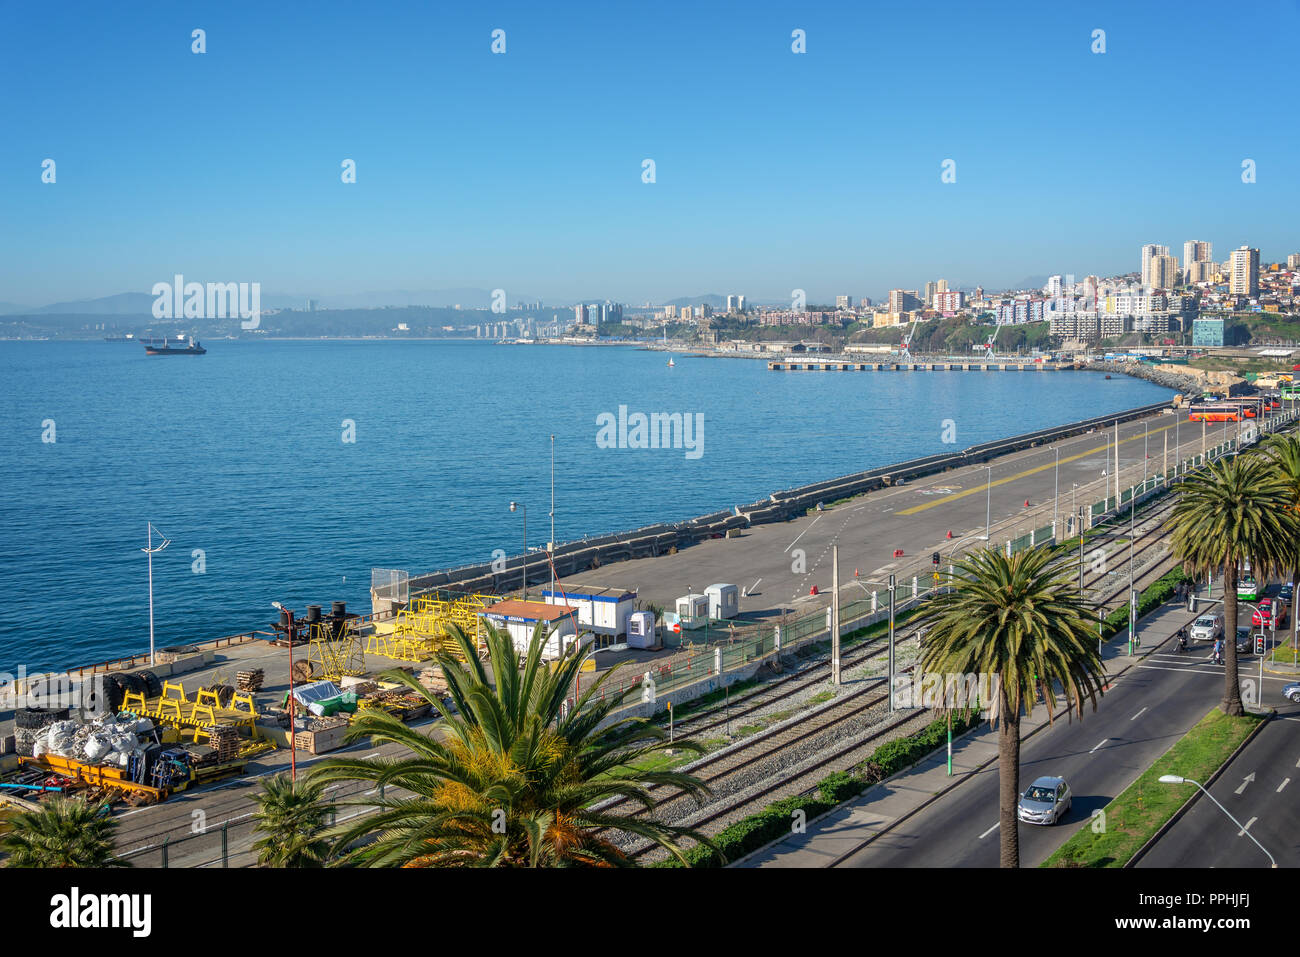 Pacific ocean and harbor of Valparaiso, Chile Stock Photo